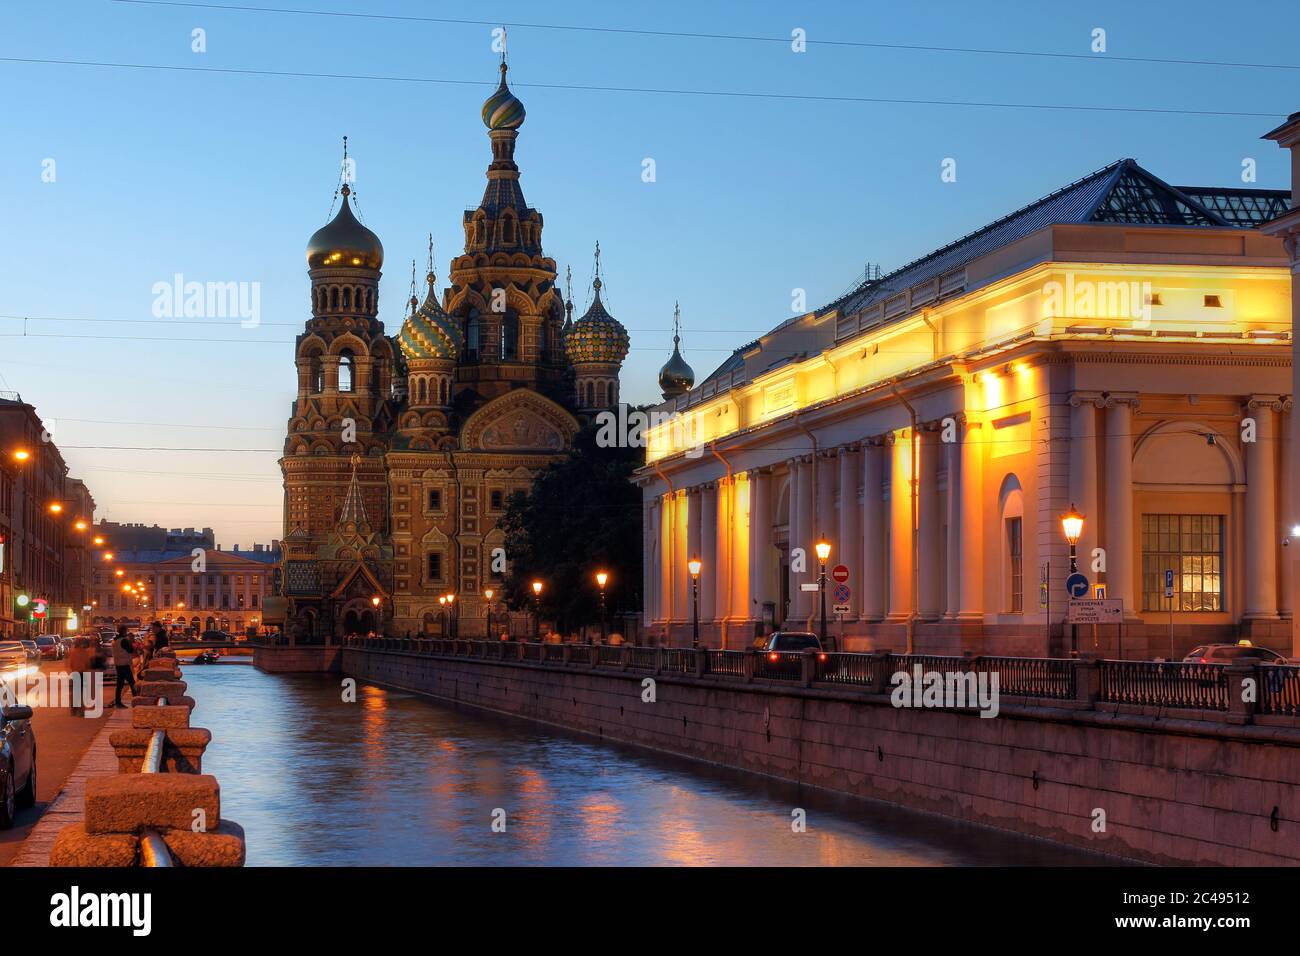 Church on Spilled Blood (or Resurrection Church of Our Saviour) in Saint Petersburg, Russia on Griboedova Canal at twilight during the white nights of Stock Photo